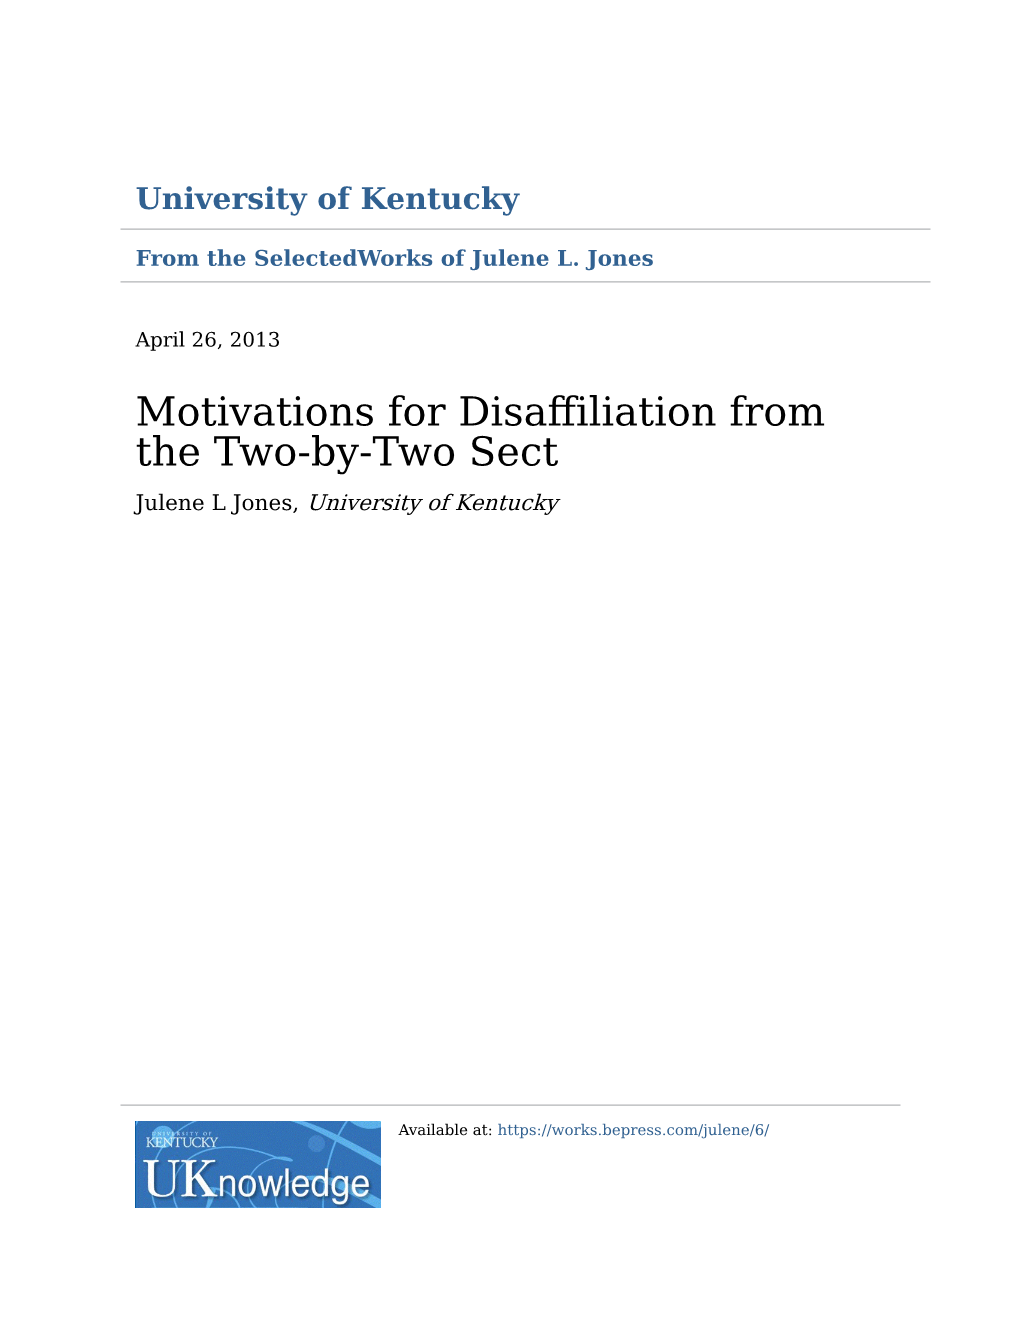 Motivations for Disaffiliation from the Two-By-Two Sect Julene L Jones, University of Kentucky